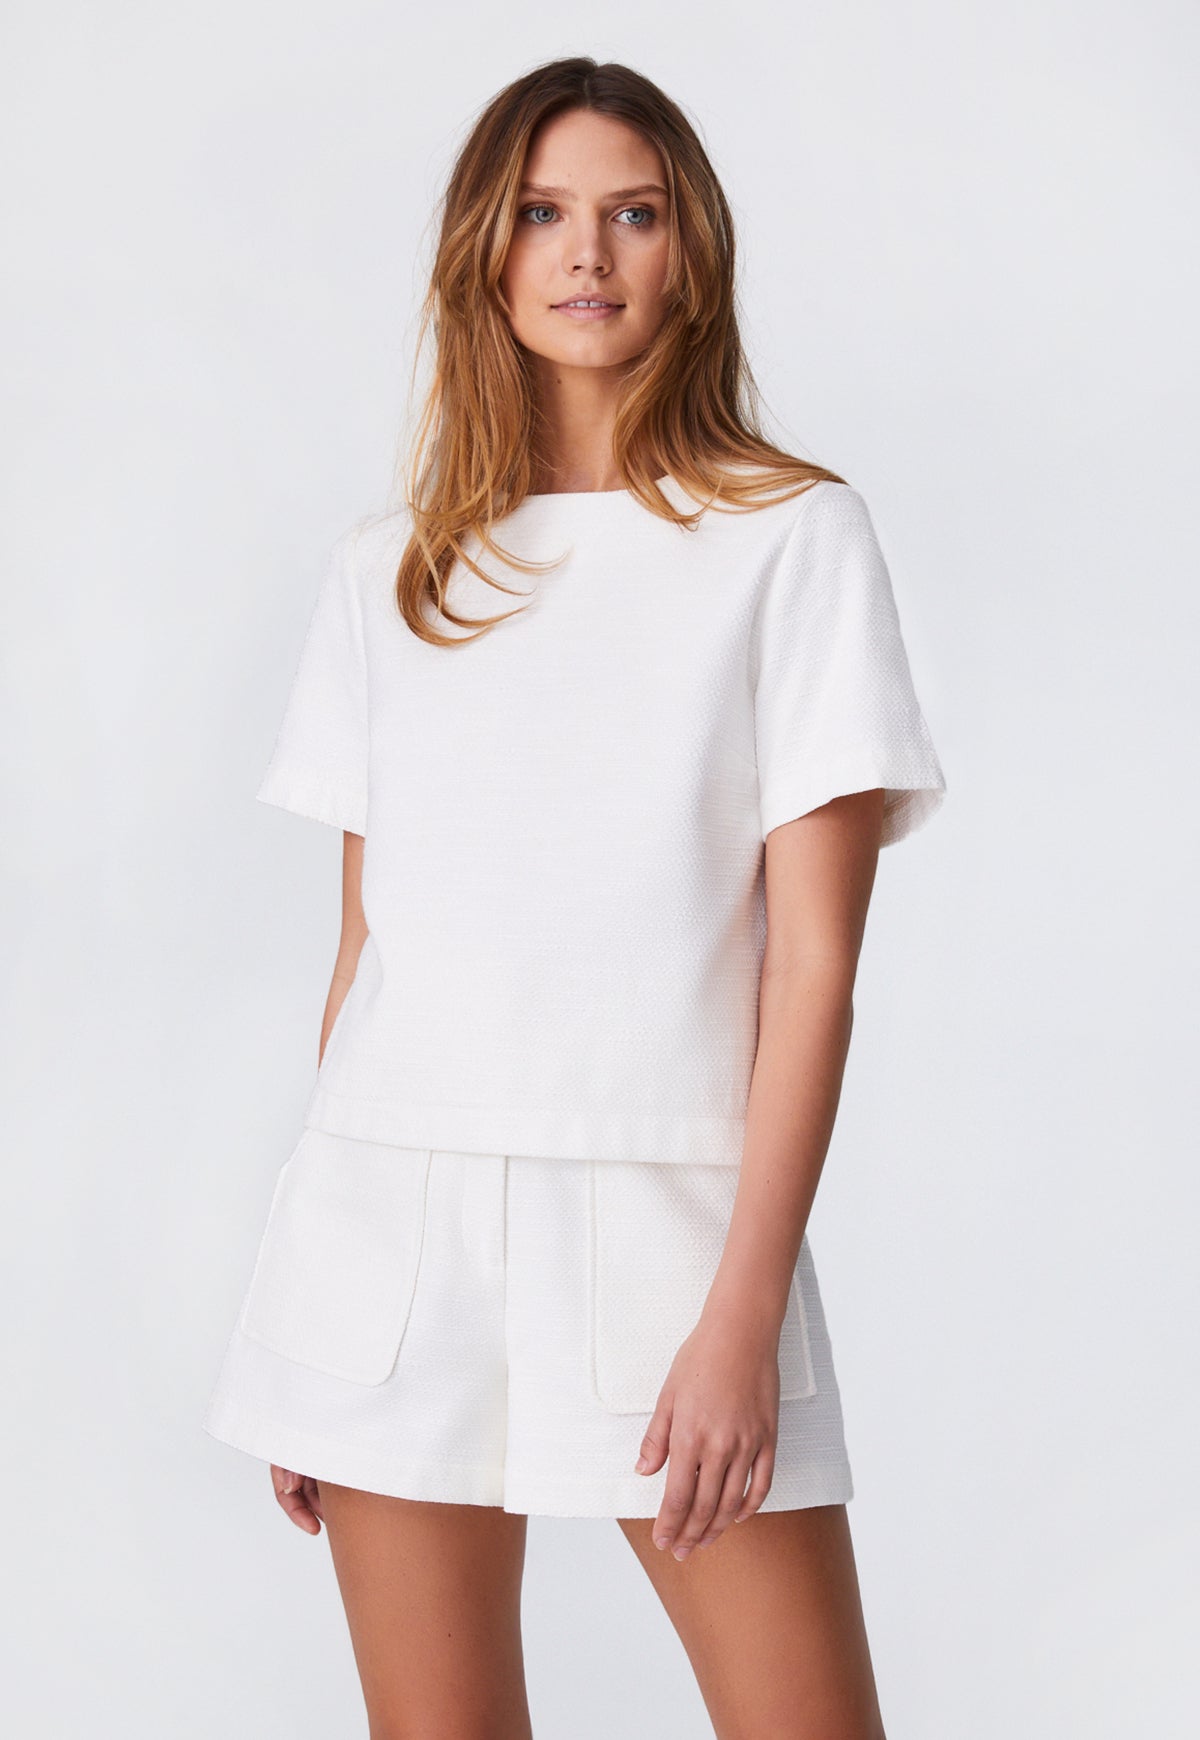 THE T-SHIRT in WHITE TEXTURED COTTON